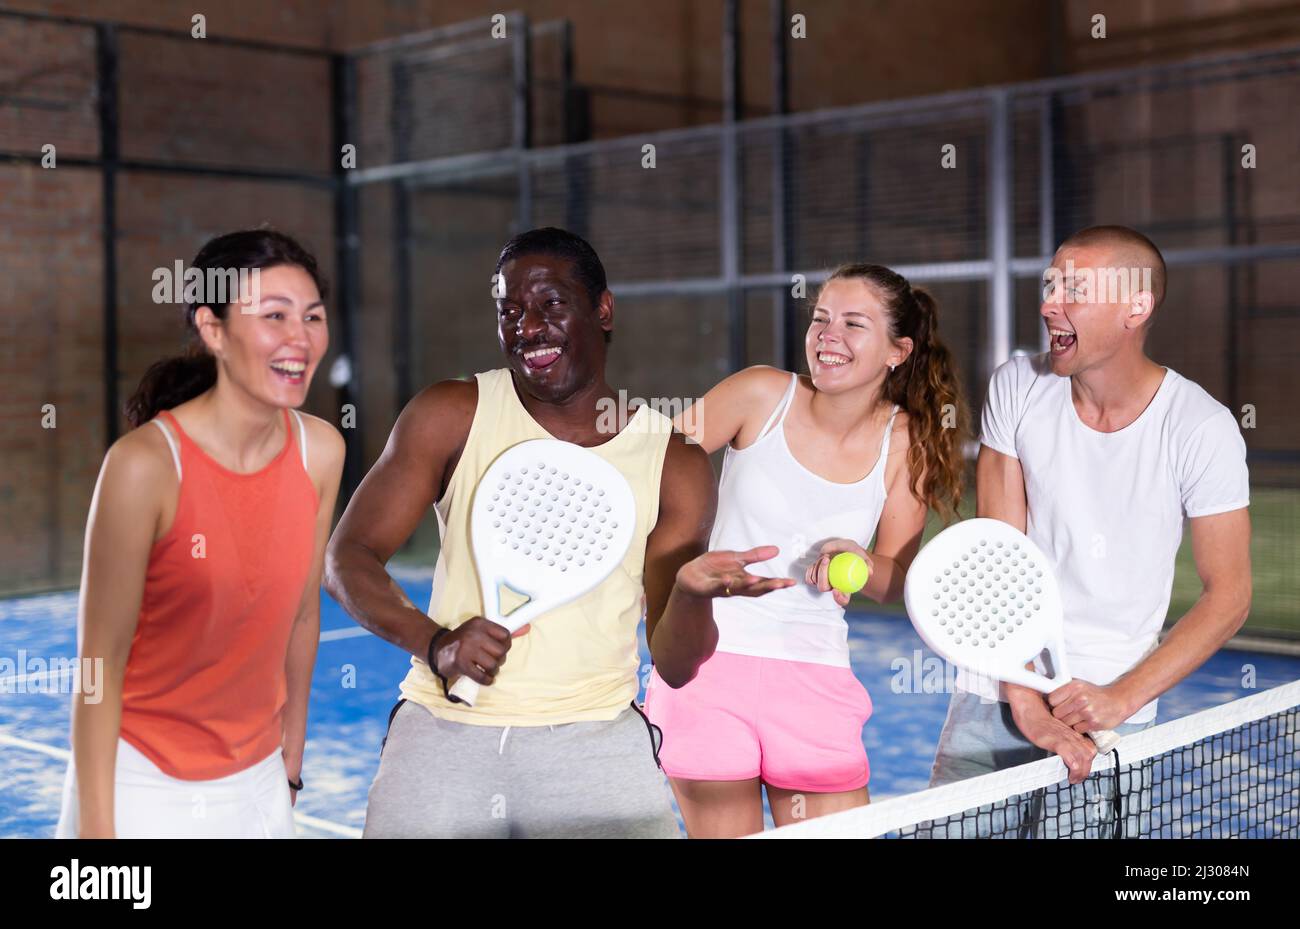 Laughing men and women with rackets and balls talking on indoor padel court Stock Photo